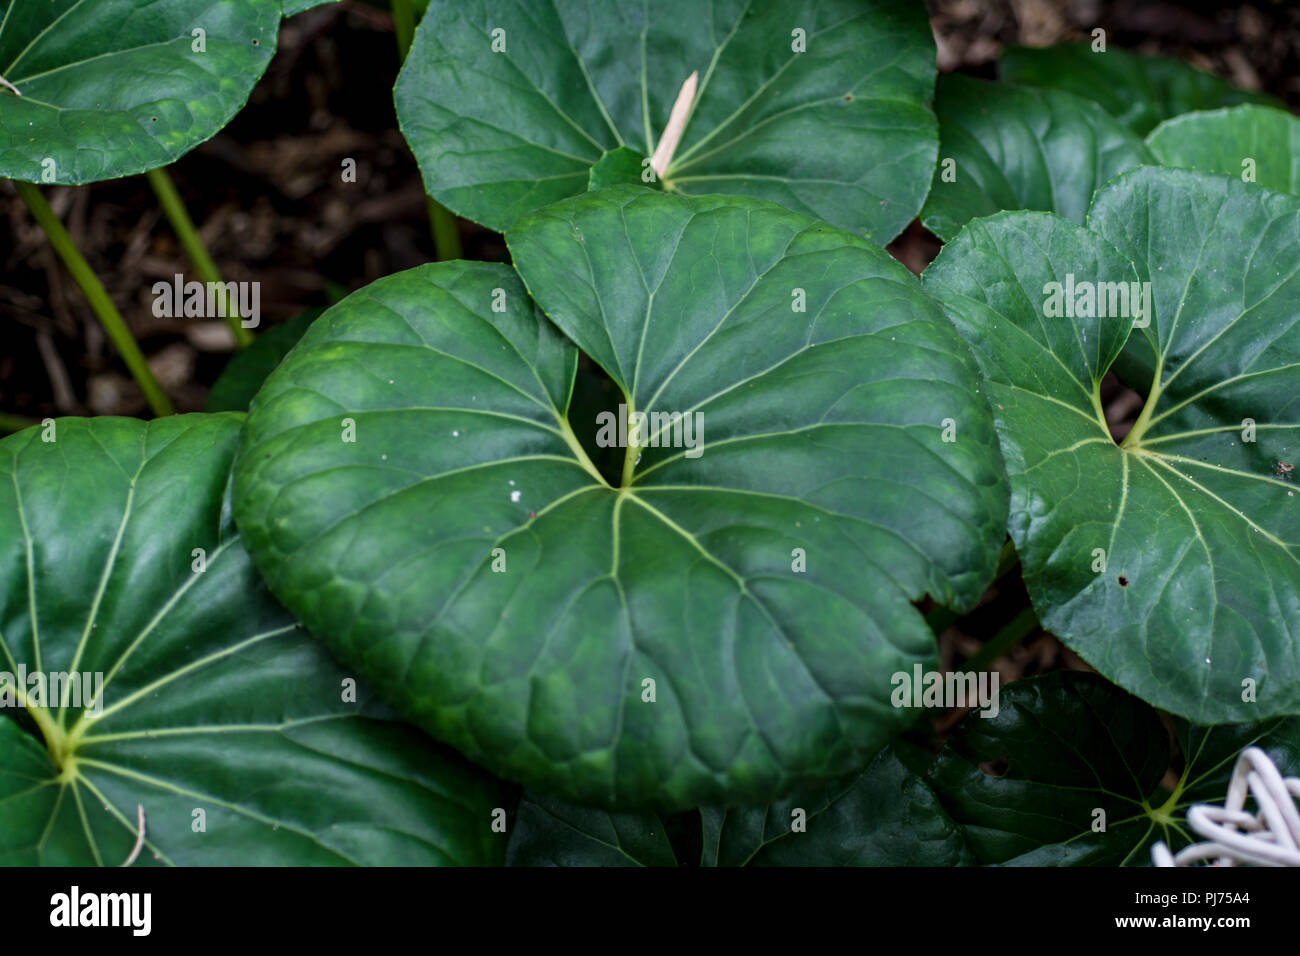 unknown green leaf plants Stock Photo